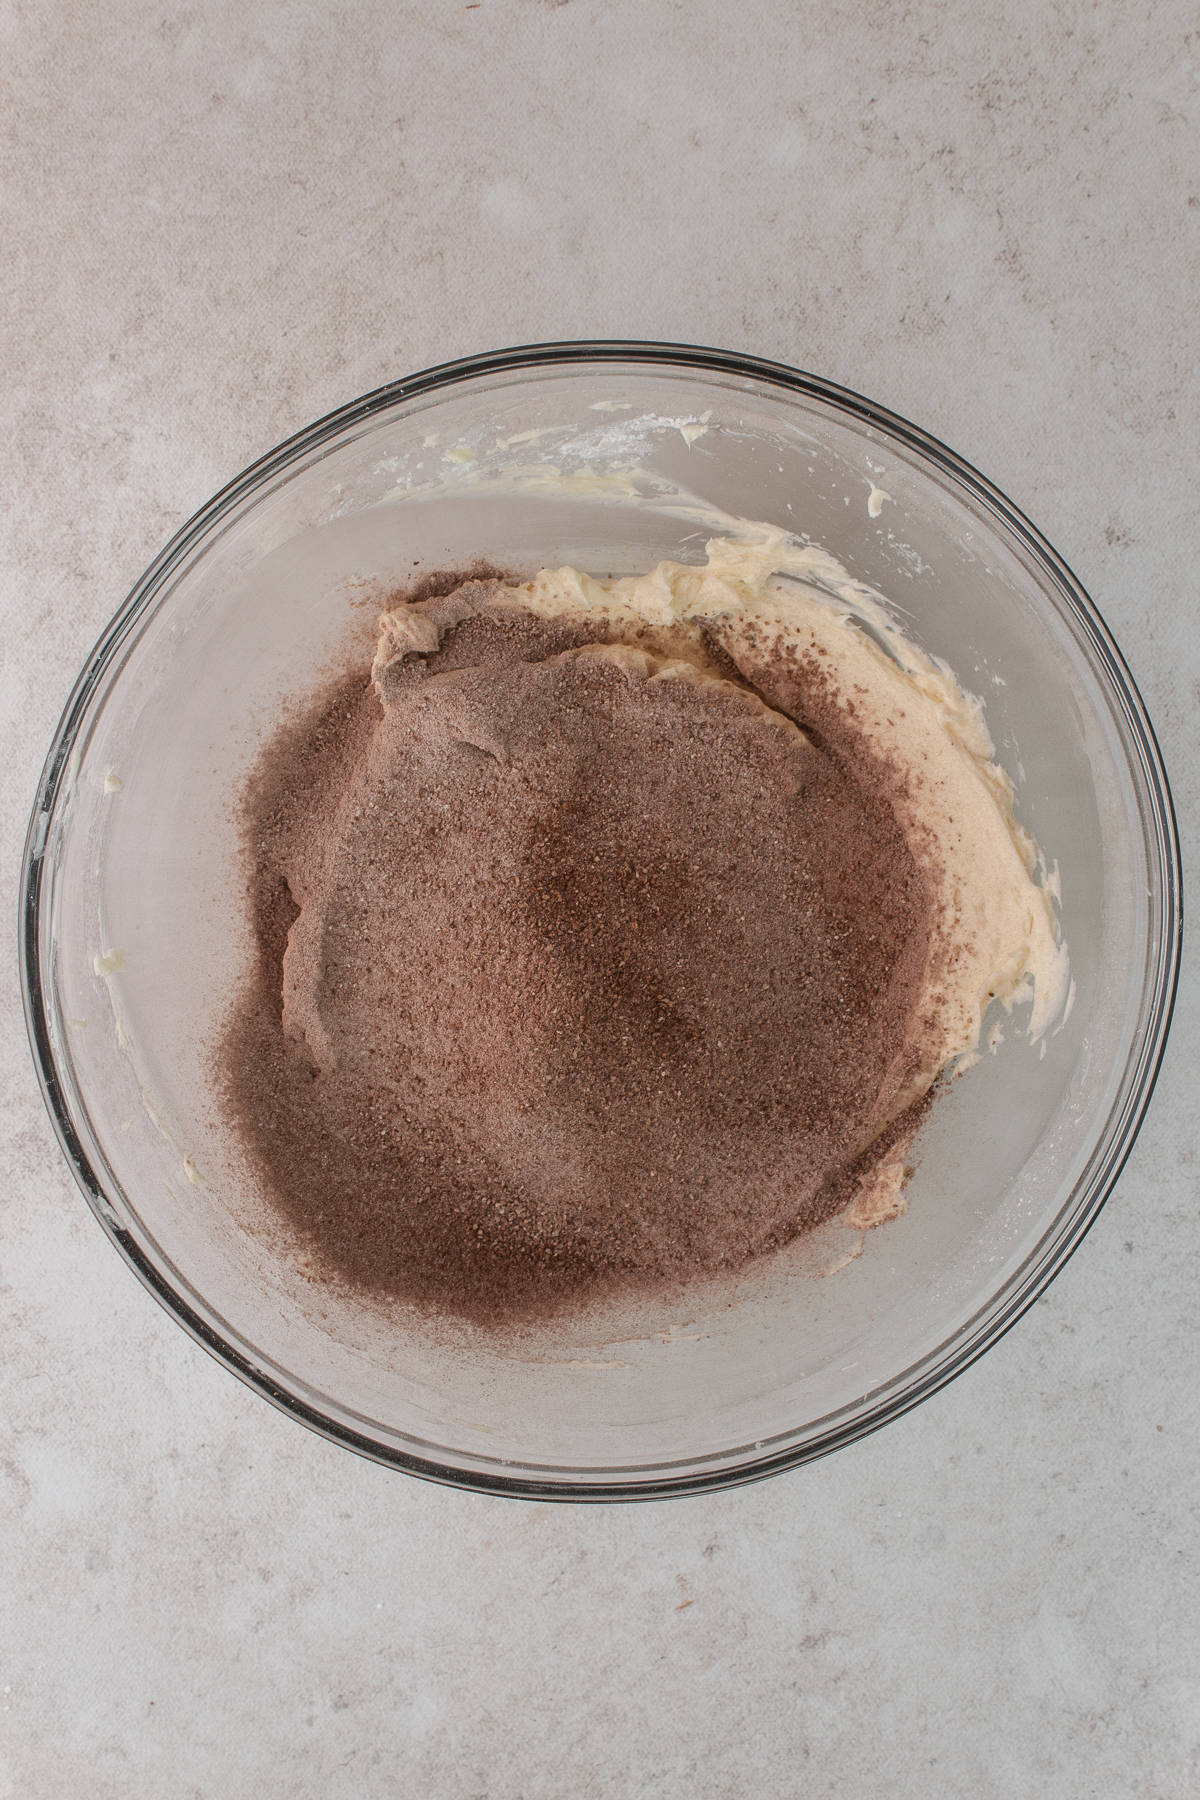 Flour, cocoa powder and salt are added to the butter mixture